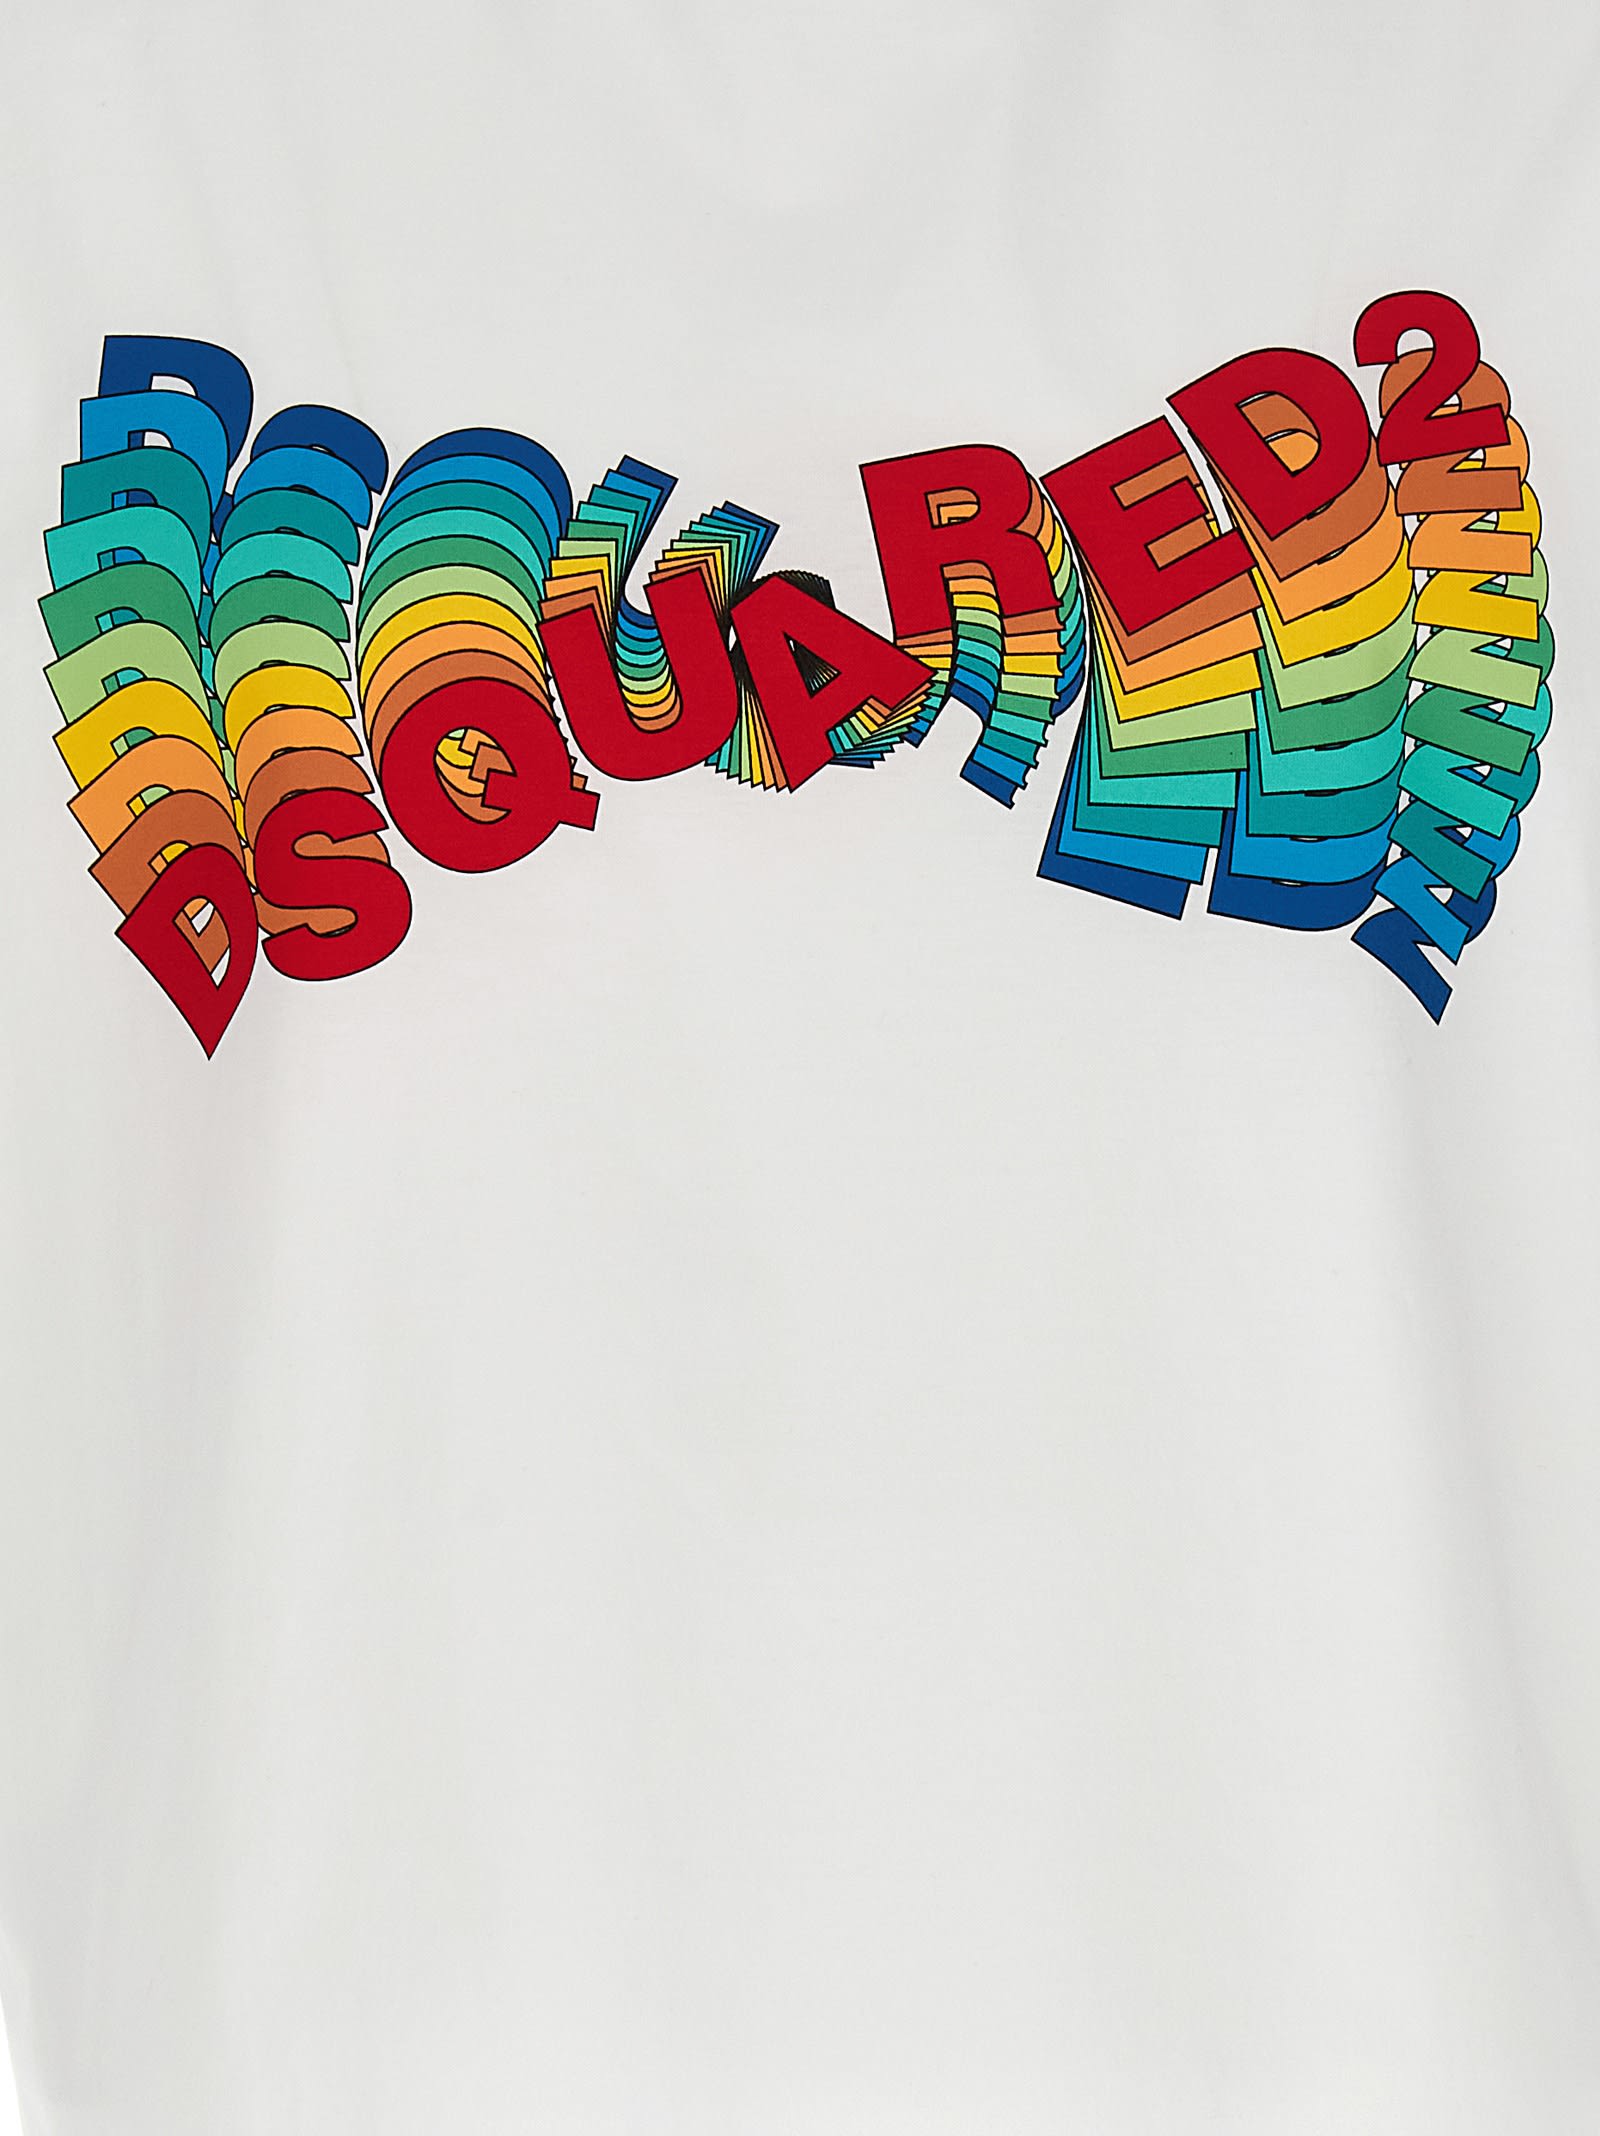 Shop Dsquared2 T-shirt Regular Fit In White